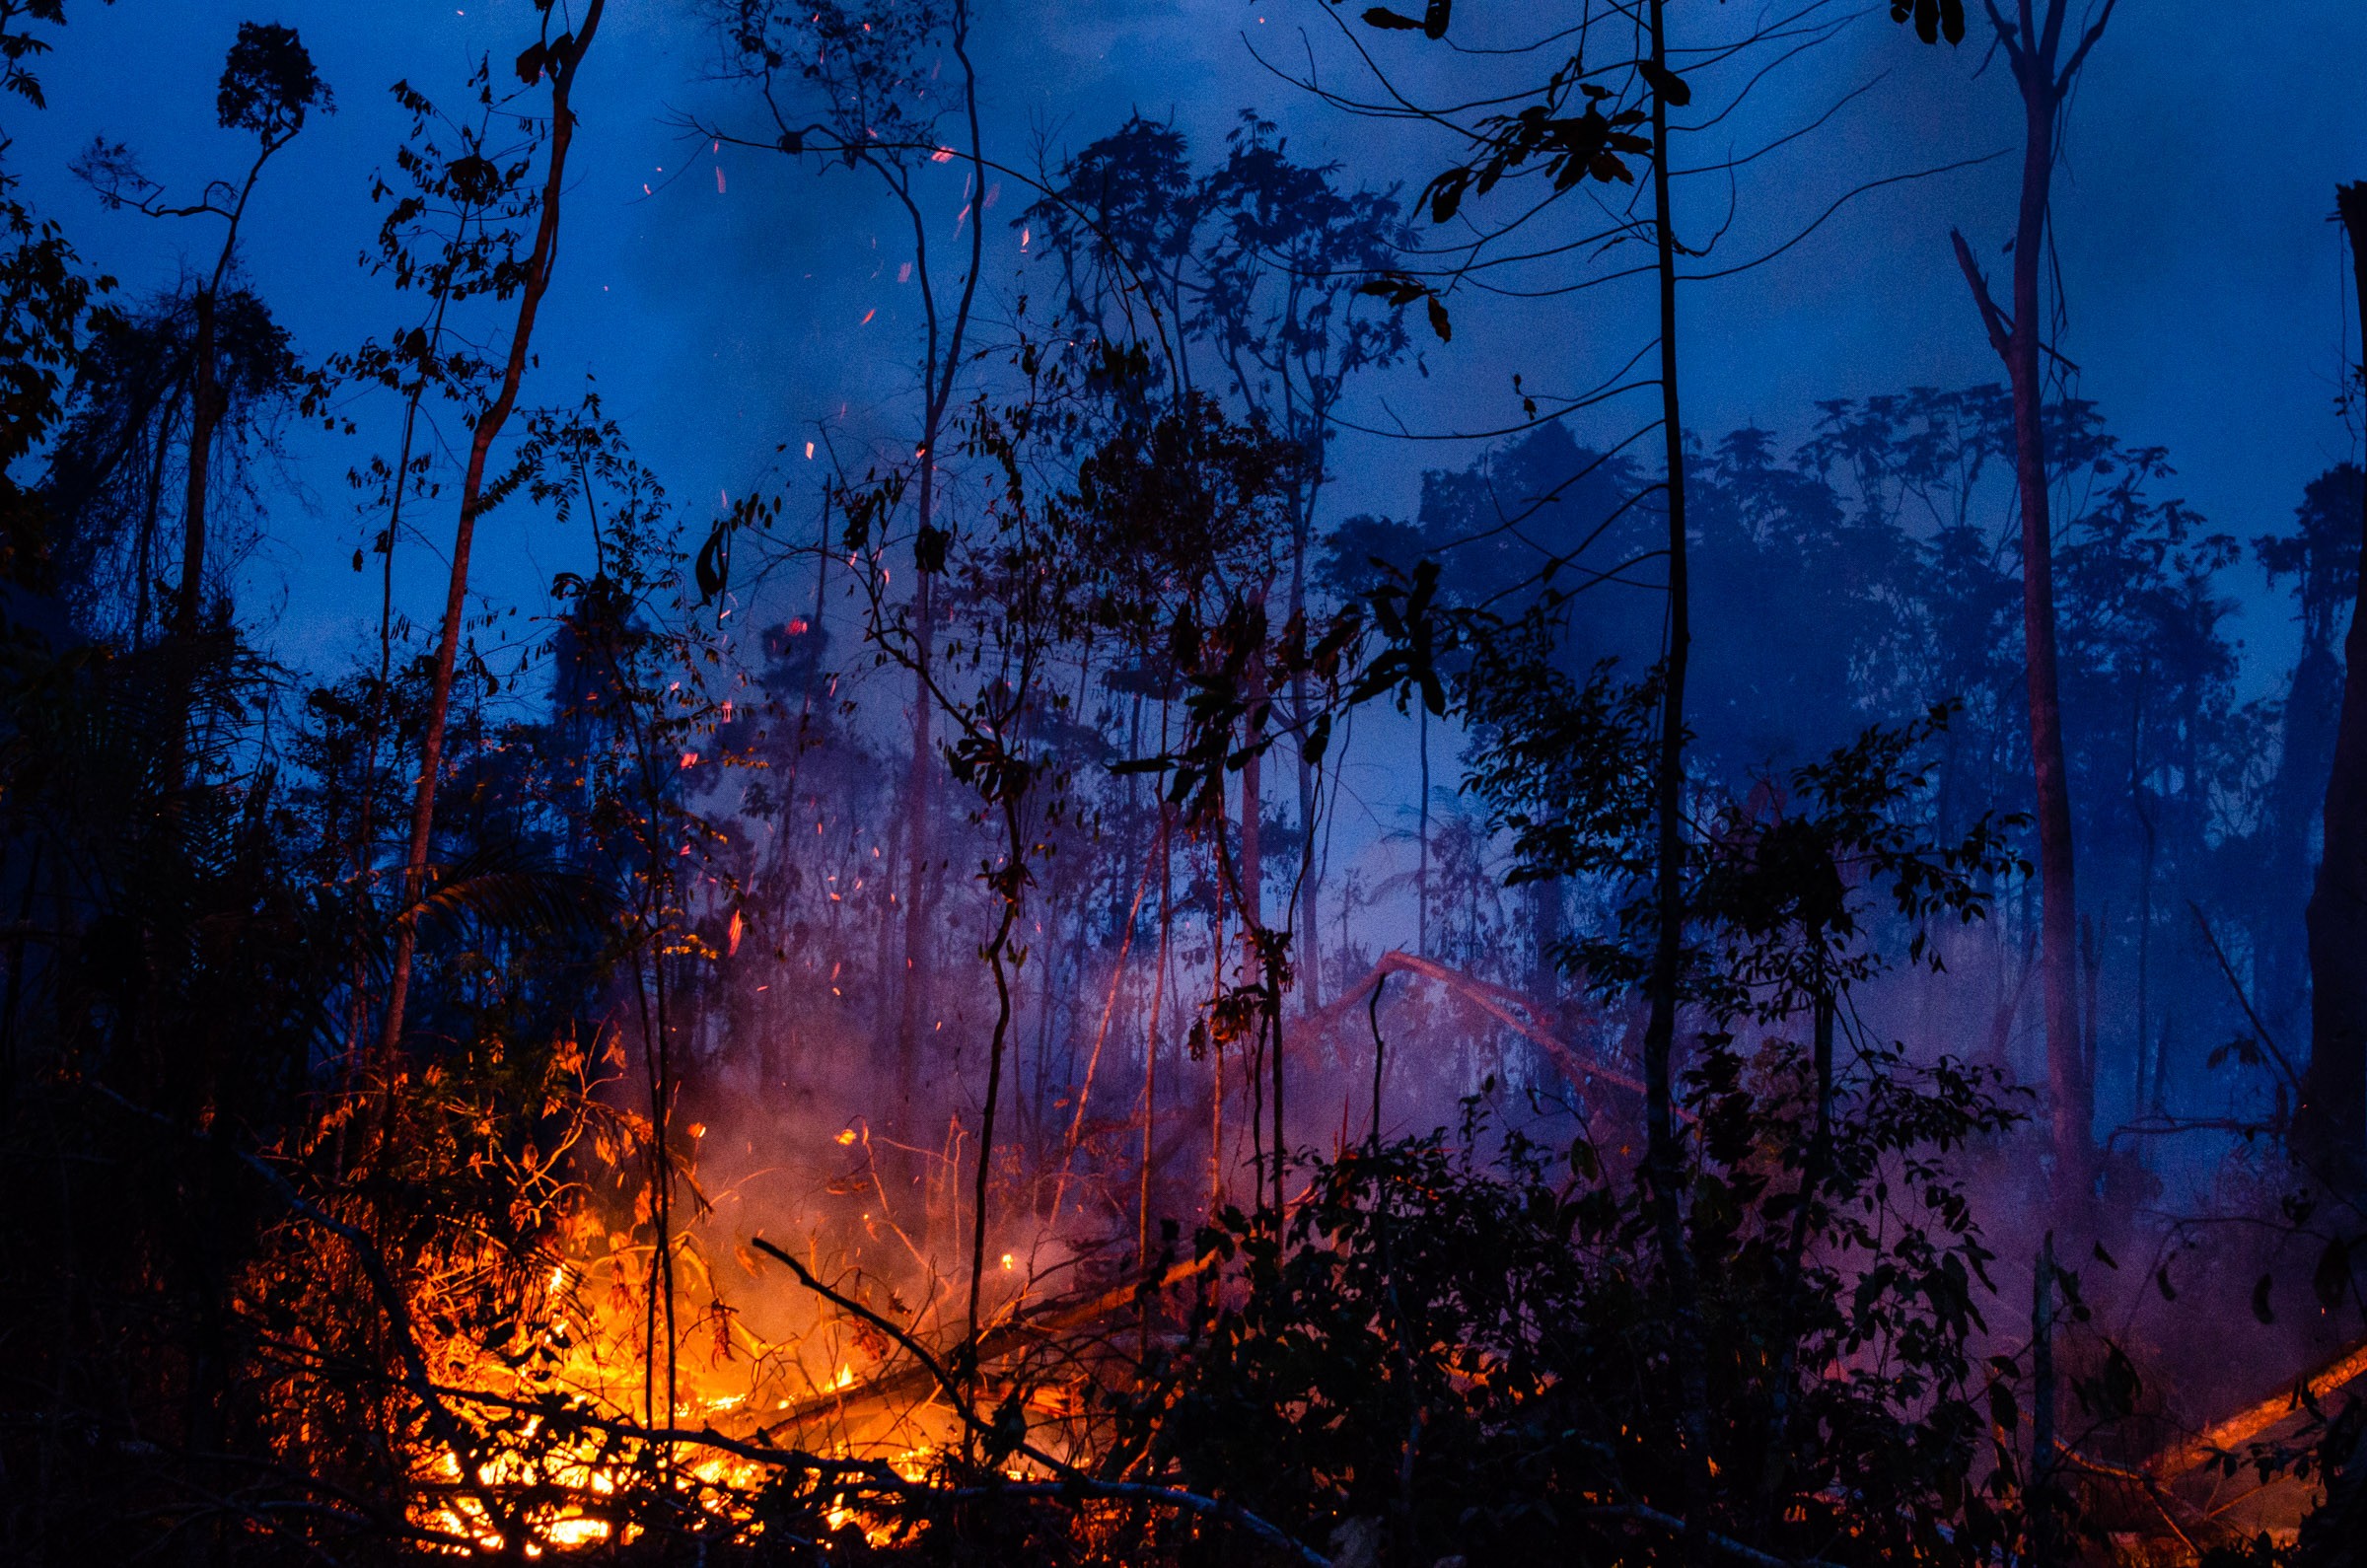 PARA, BRAZIL, 31/08/2019 -  Amazon forest area is burned in rural Novo Progresso, in Para, north of Brazil, this Saturday, August 31st, days after the president decreet prohibiting the intentional burnings that multiplied this year in the Amazon region. W (Foto: NurPhoto via Getty Images)